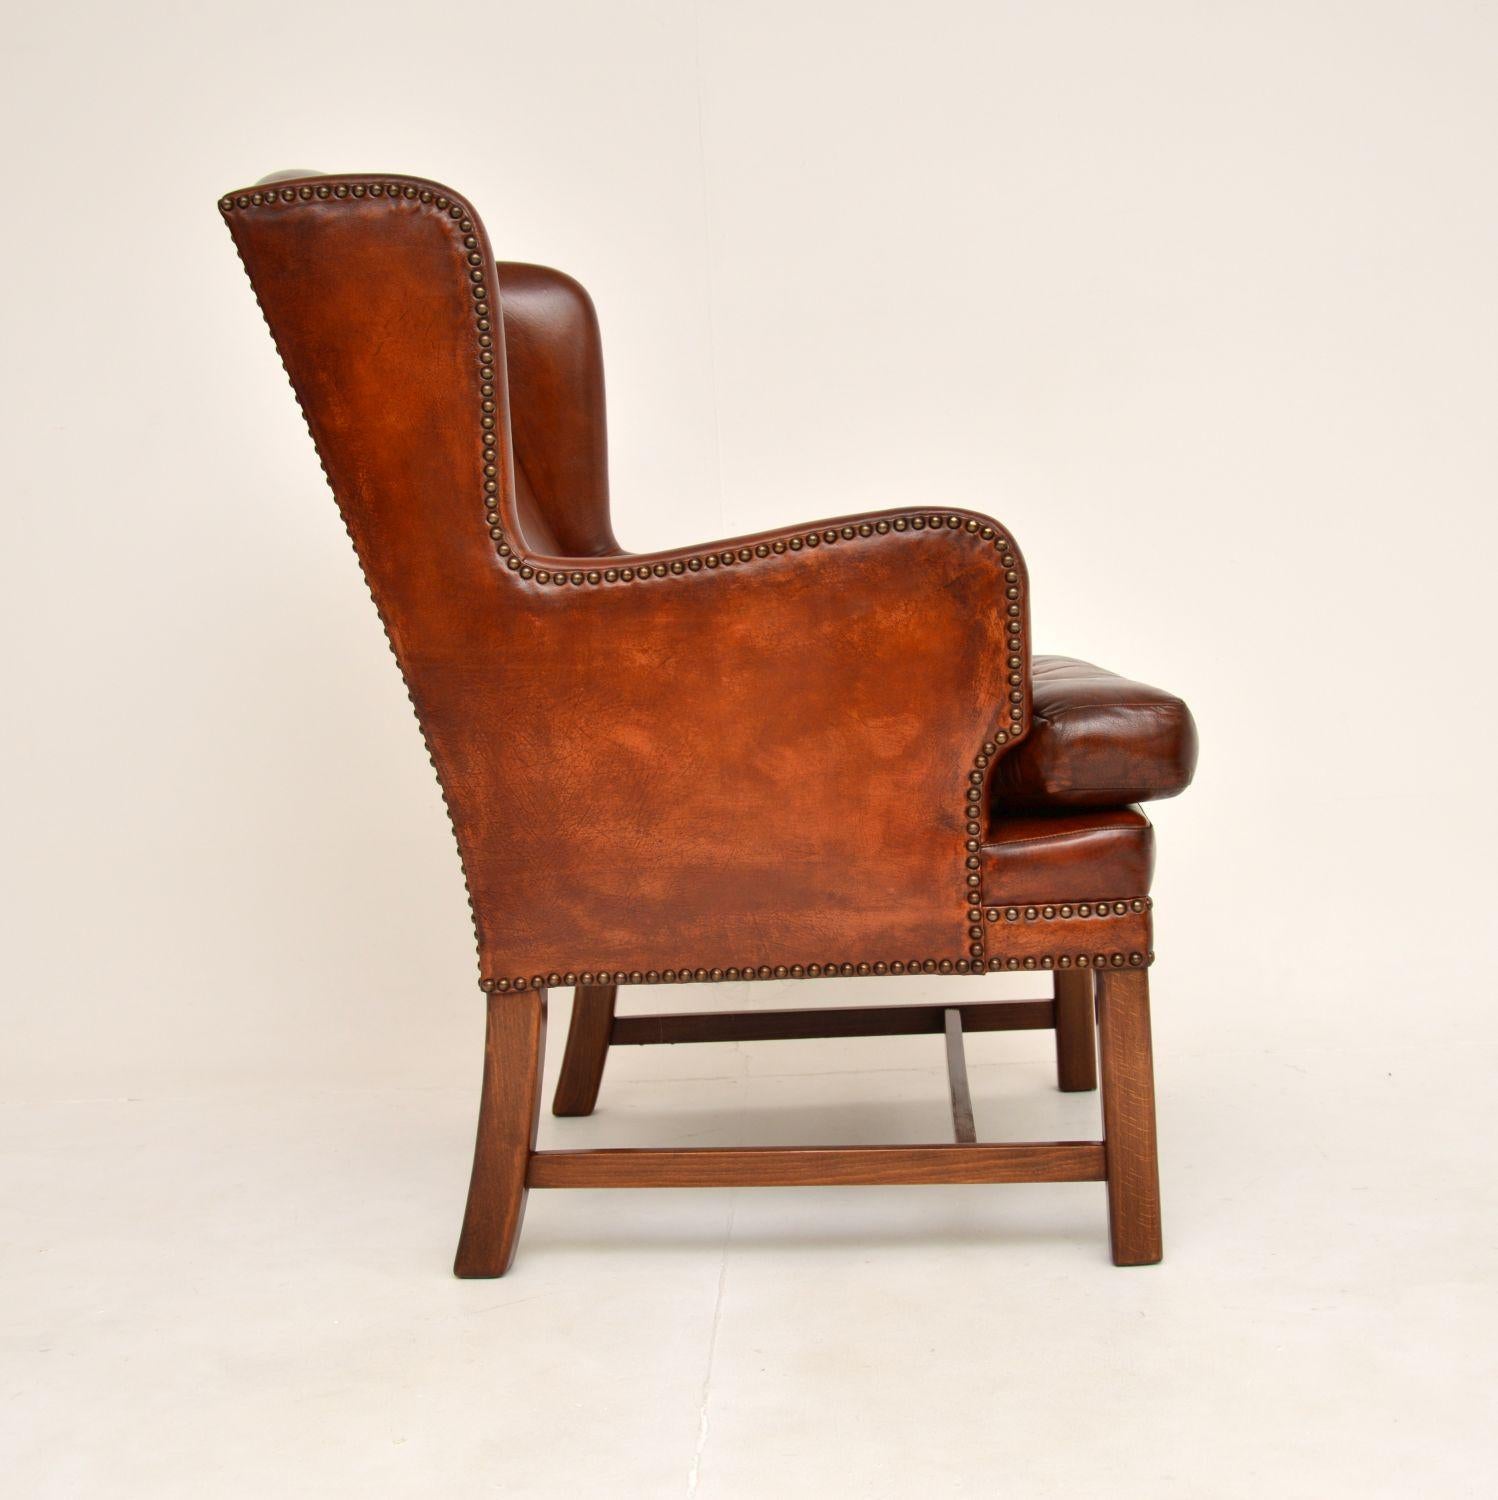 Victorian Antique Swedish Leather Wing Back Armchair For Sale